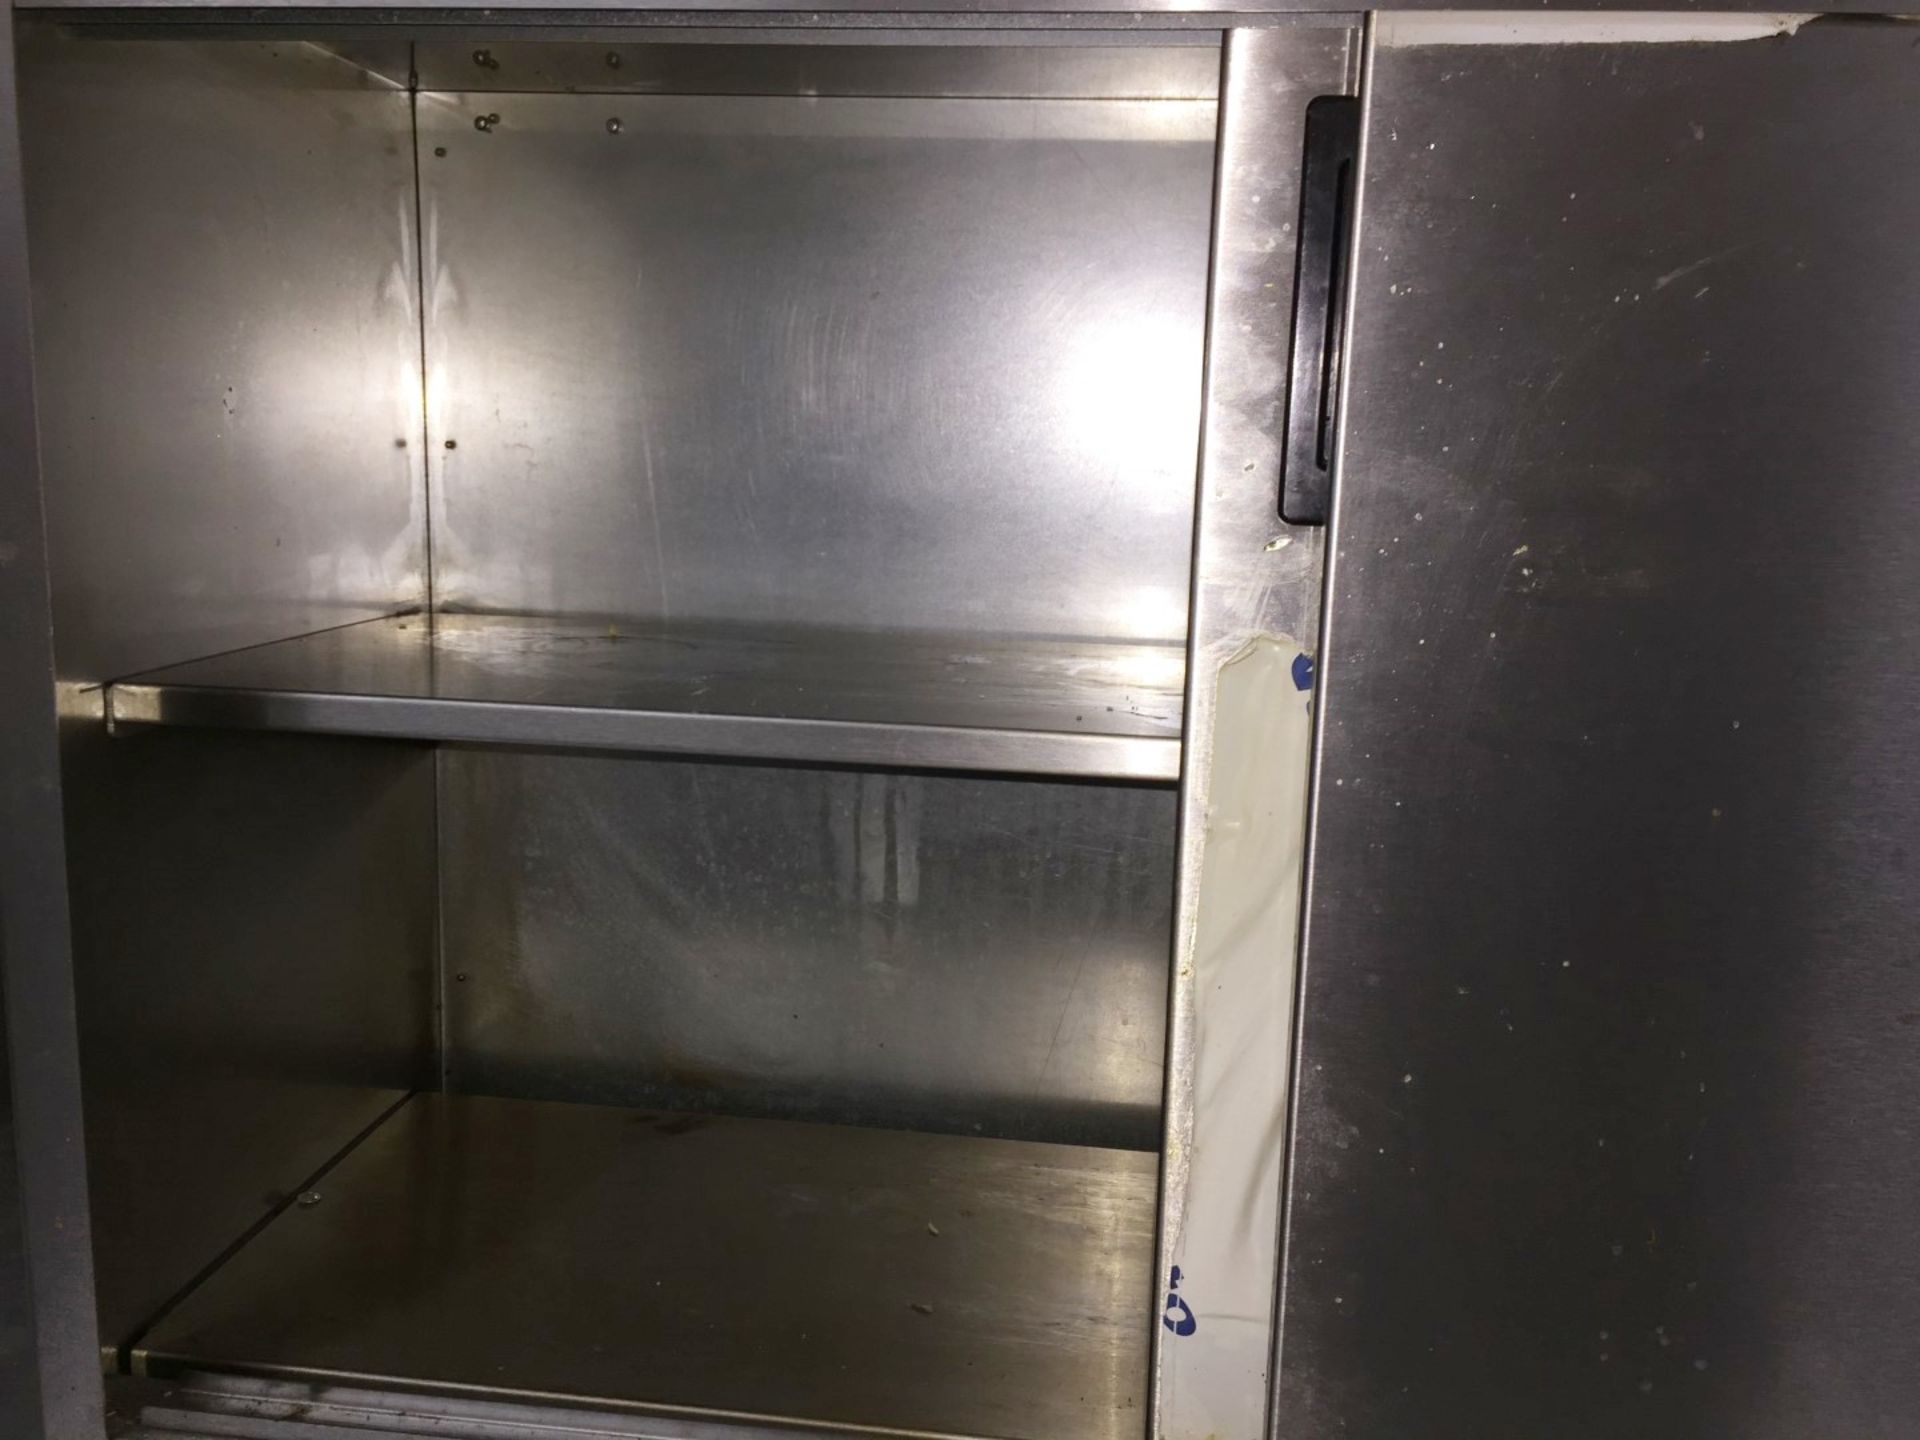 1 x Victor Earl Hot Cupboard - Model Number HED90100 - CL188 - Capacity 18 Plated Meals or 80 x - Image 3 of 6